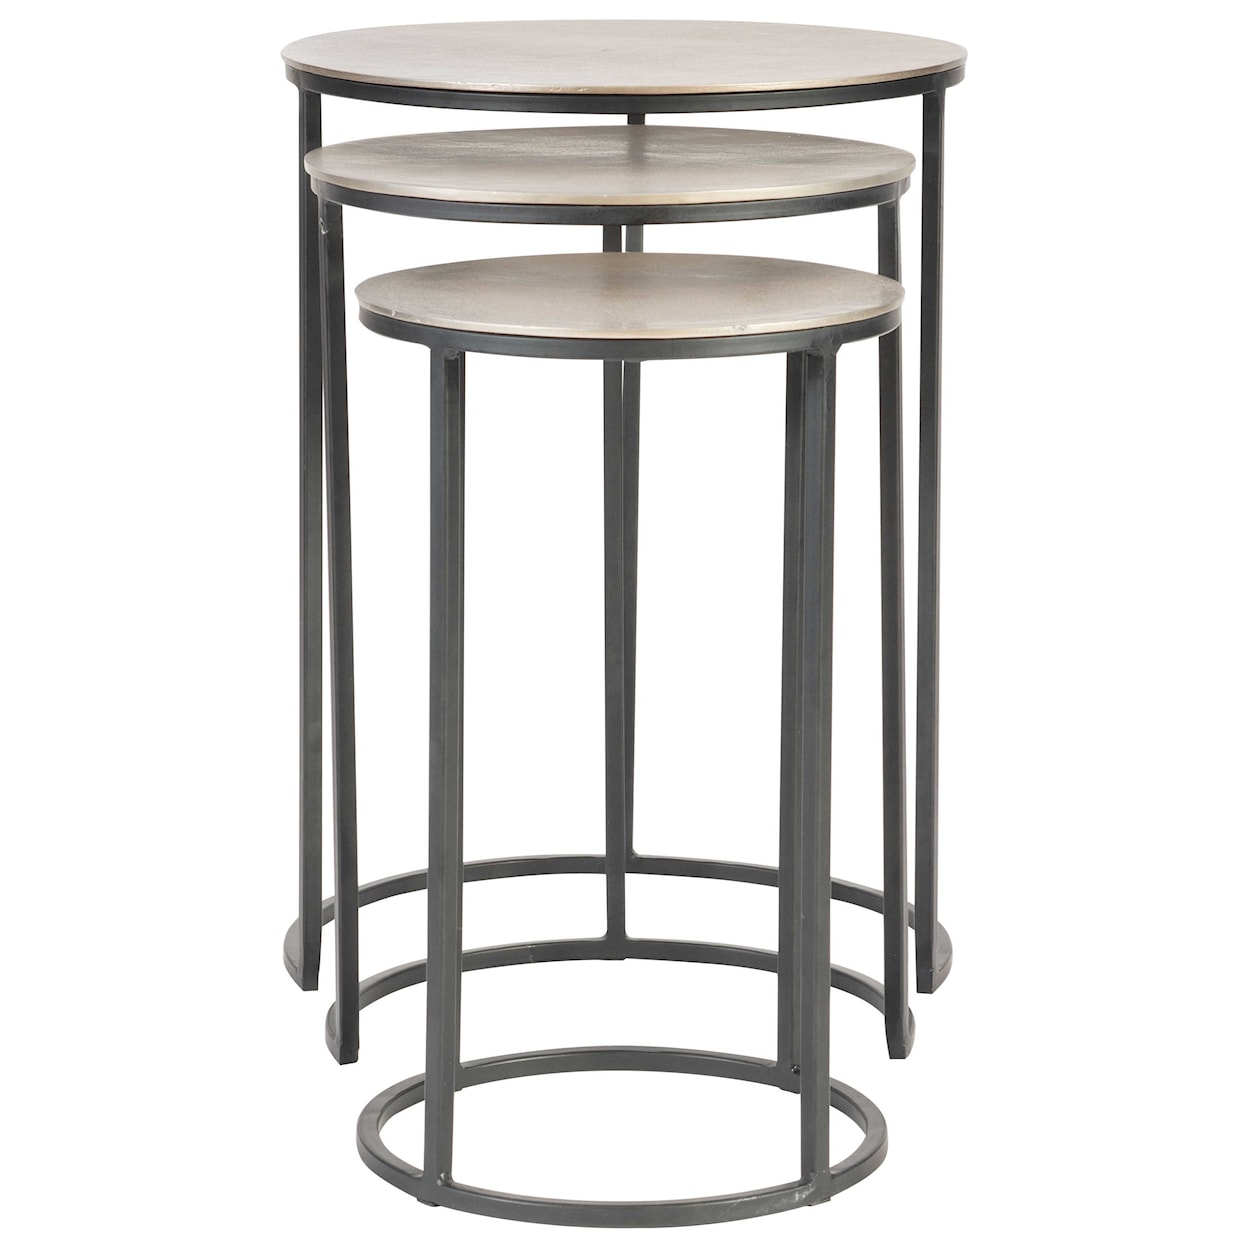 Uttermost Accent Furniture - Occasional Tables Erik Metal Nesting Tables, S/3